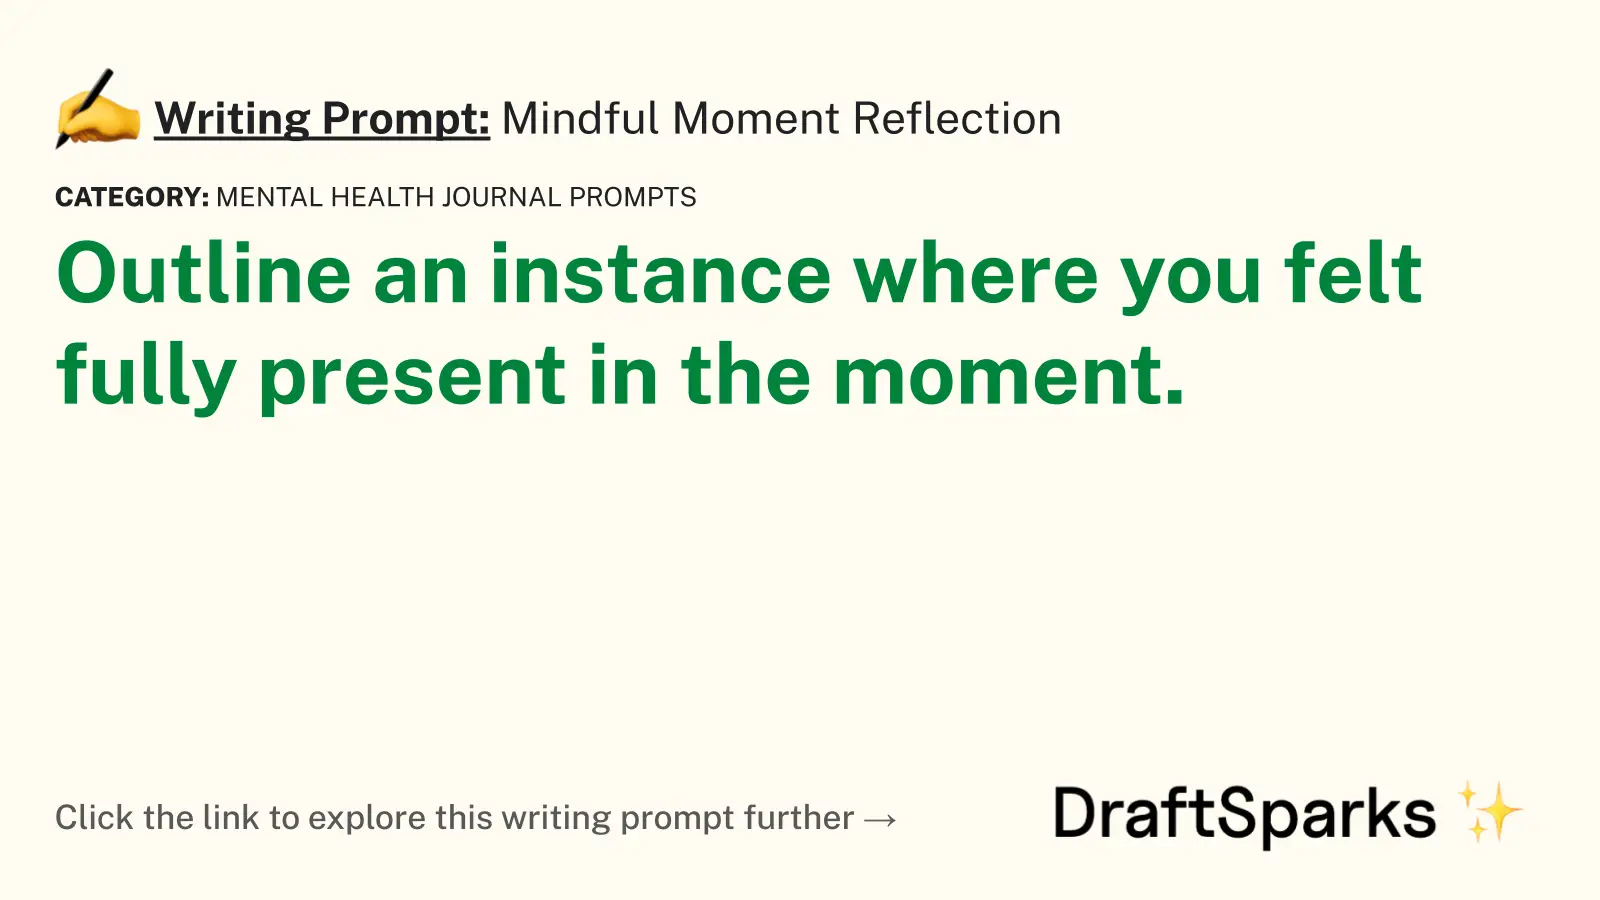 Mindful Moment Reflection